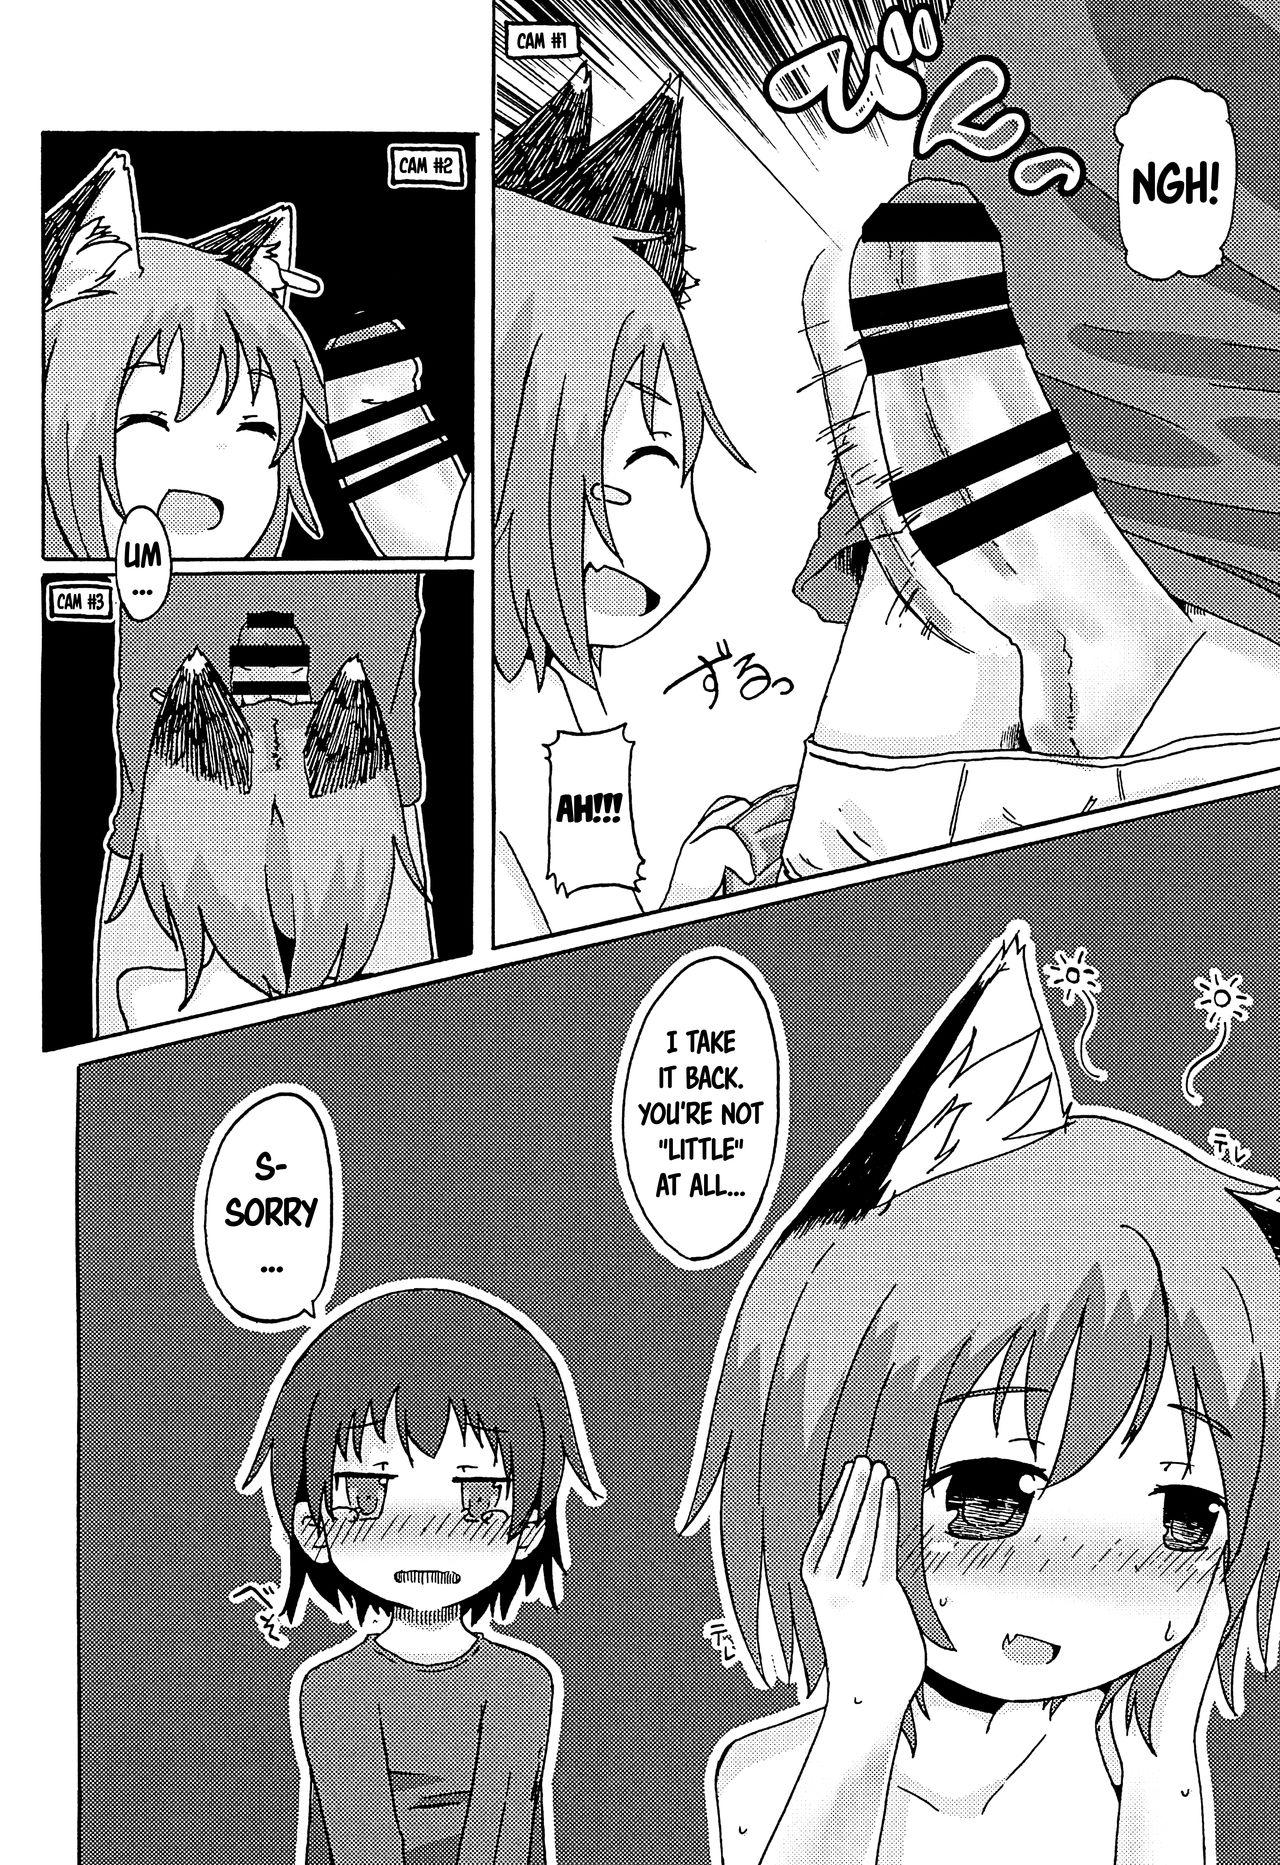 Gay Sex Kyoudai de Tomodachi de Koibito na Boku to Neko | Siblings, Friends, Lovers: My life with a cat - Touhou project Toilet - Page 11